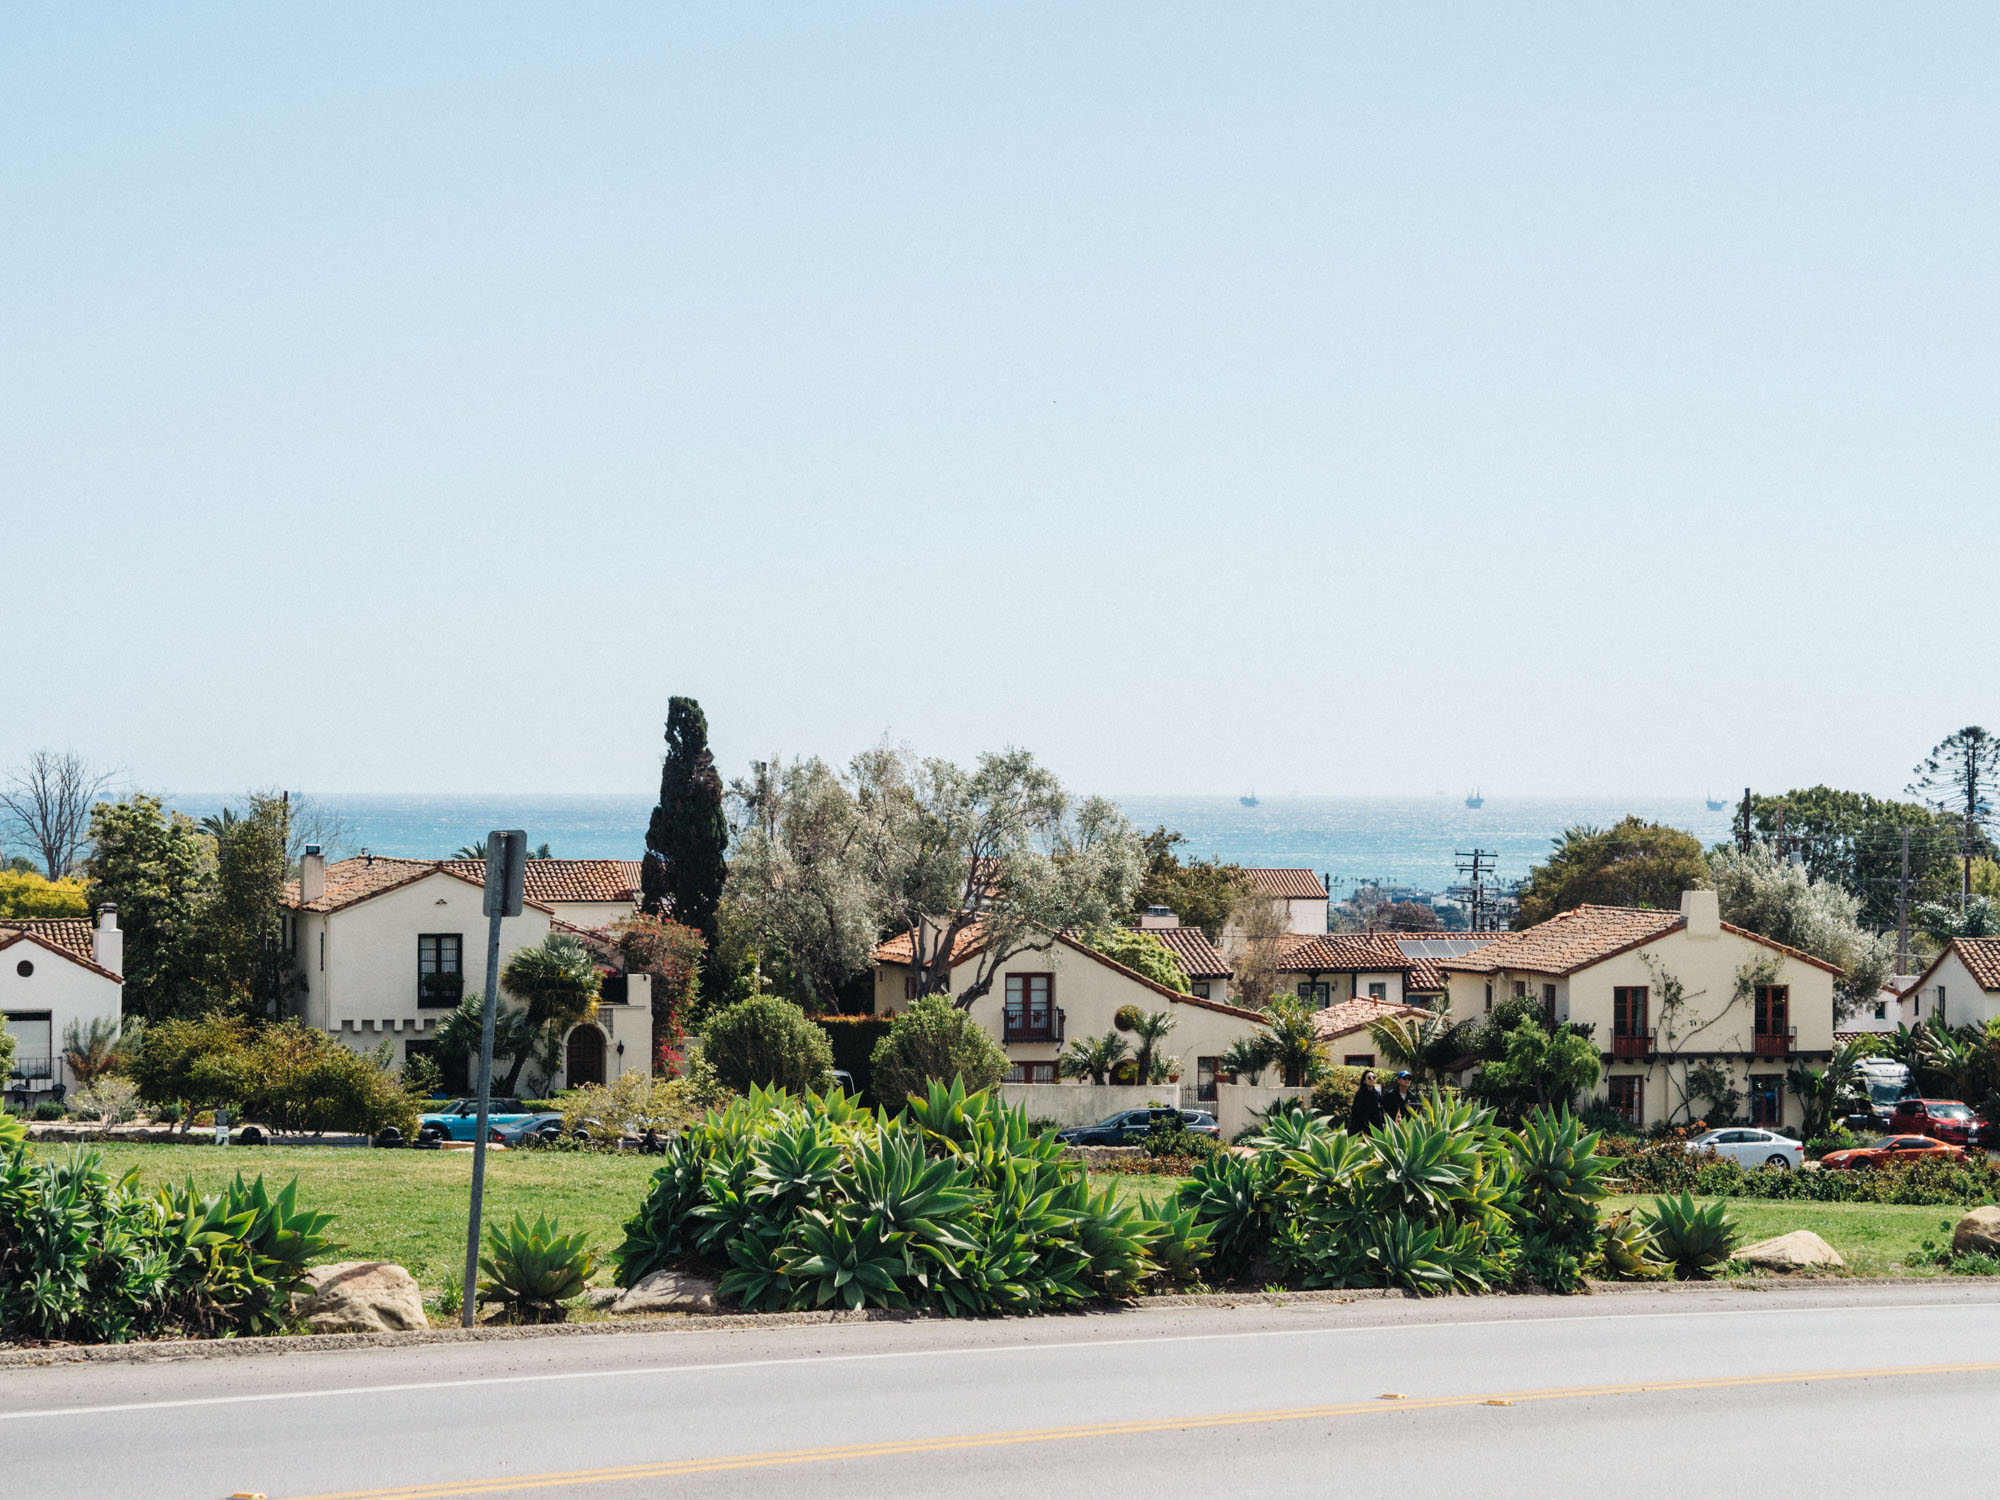 View of the ocean from Old Mission Santa Barbara | Photography by Carla Gabriel Garcia